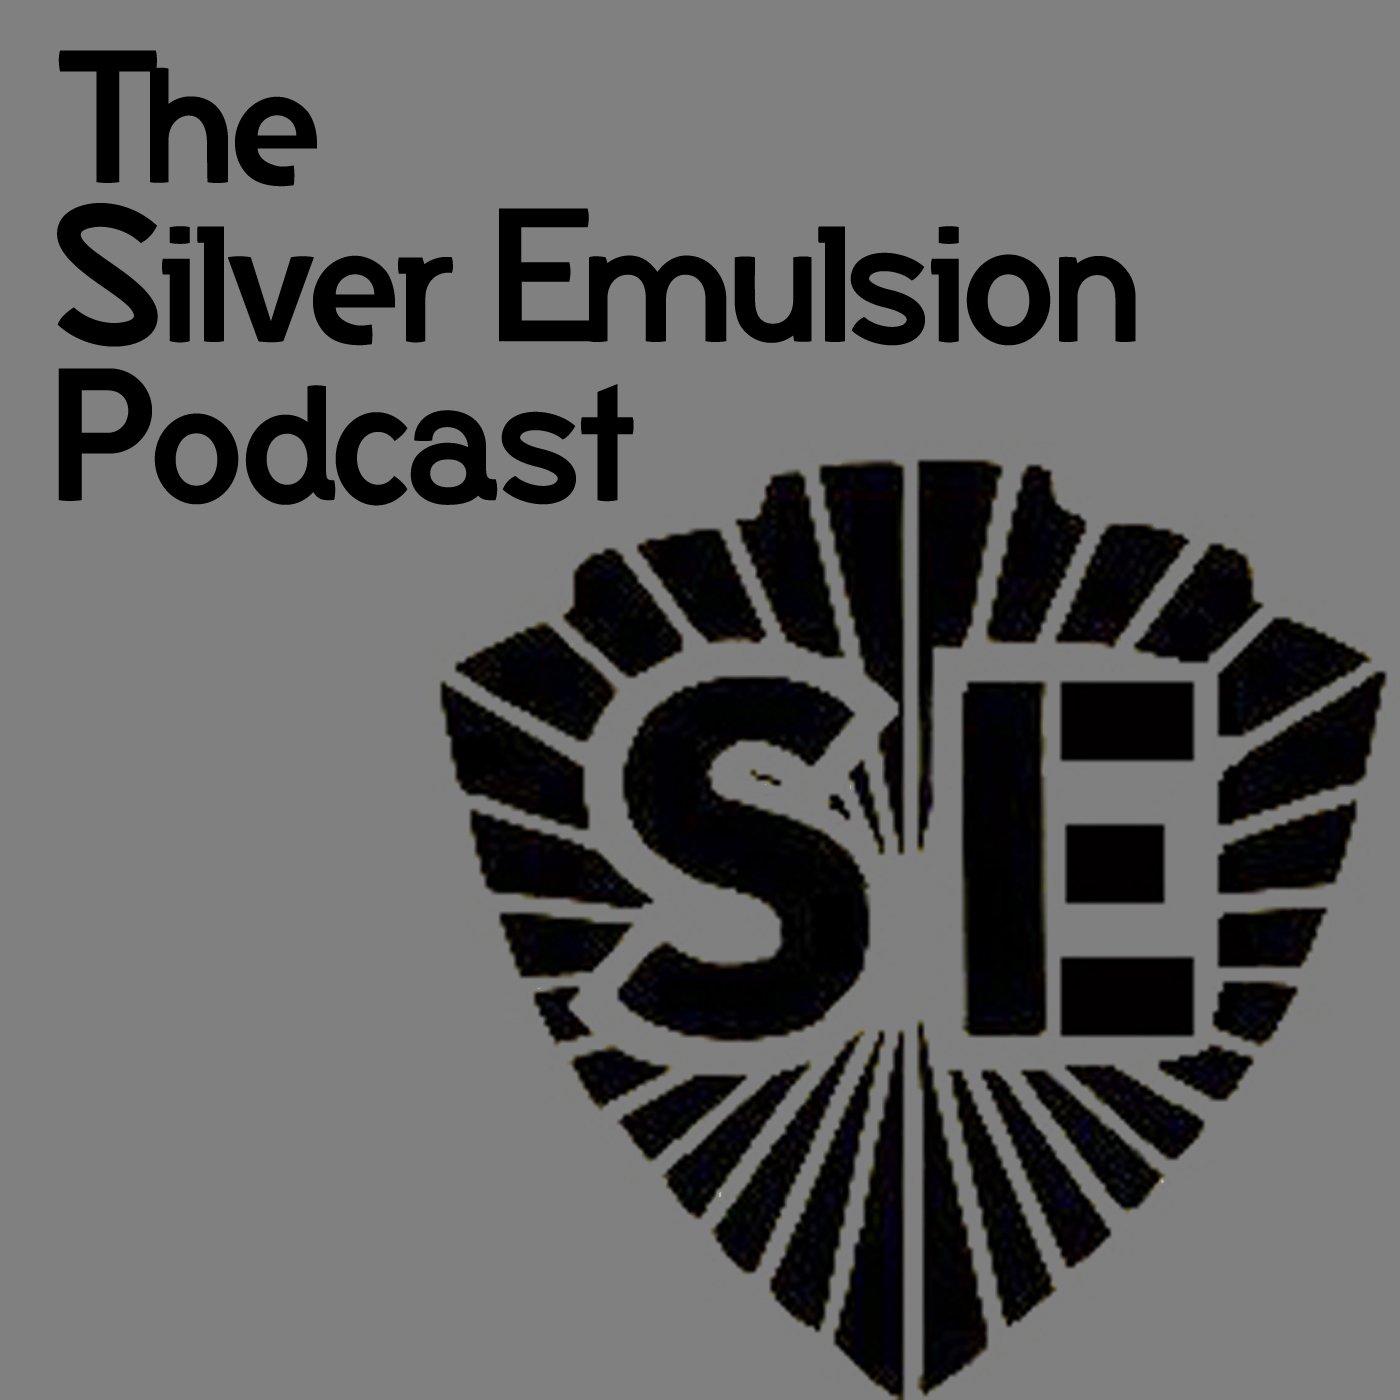 The Silver Emulsion Podcast